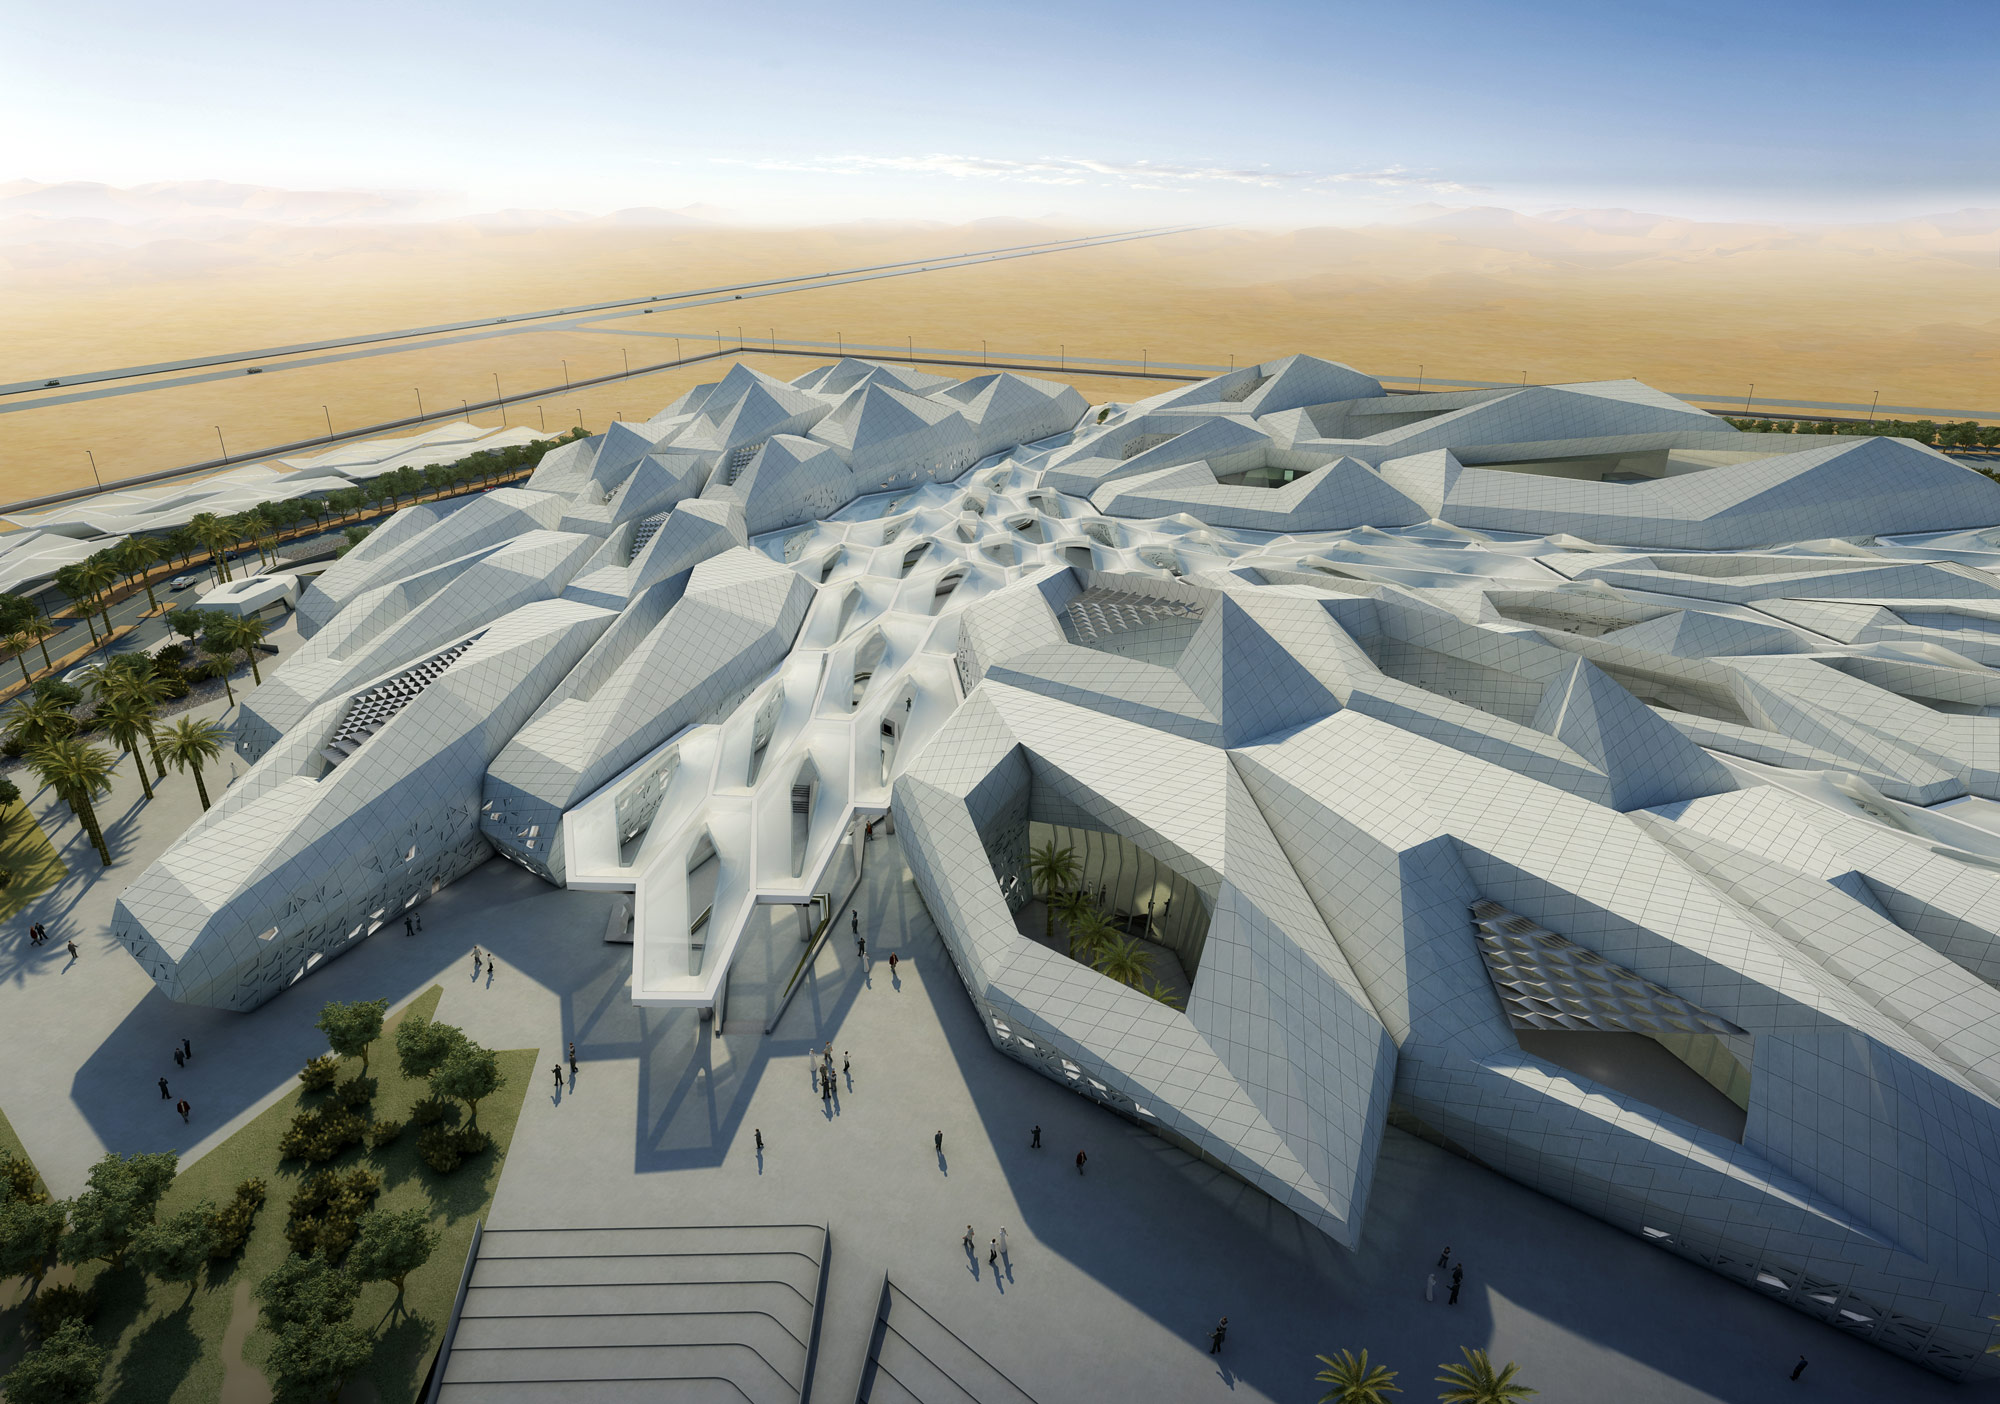 Zaha Hadid Architects’ King Abdullah Petroleum Studies and Research Center has modular cells that absorb sun through skylights that have been tuned for optimal solar orientation. (Courtesy Zaha Hadid Architects)